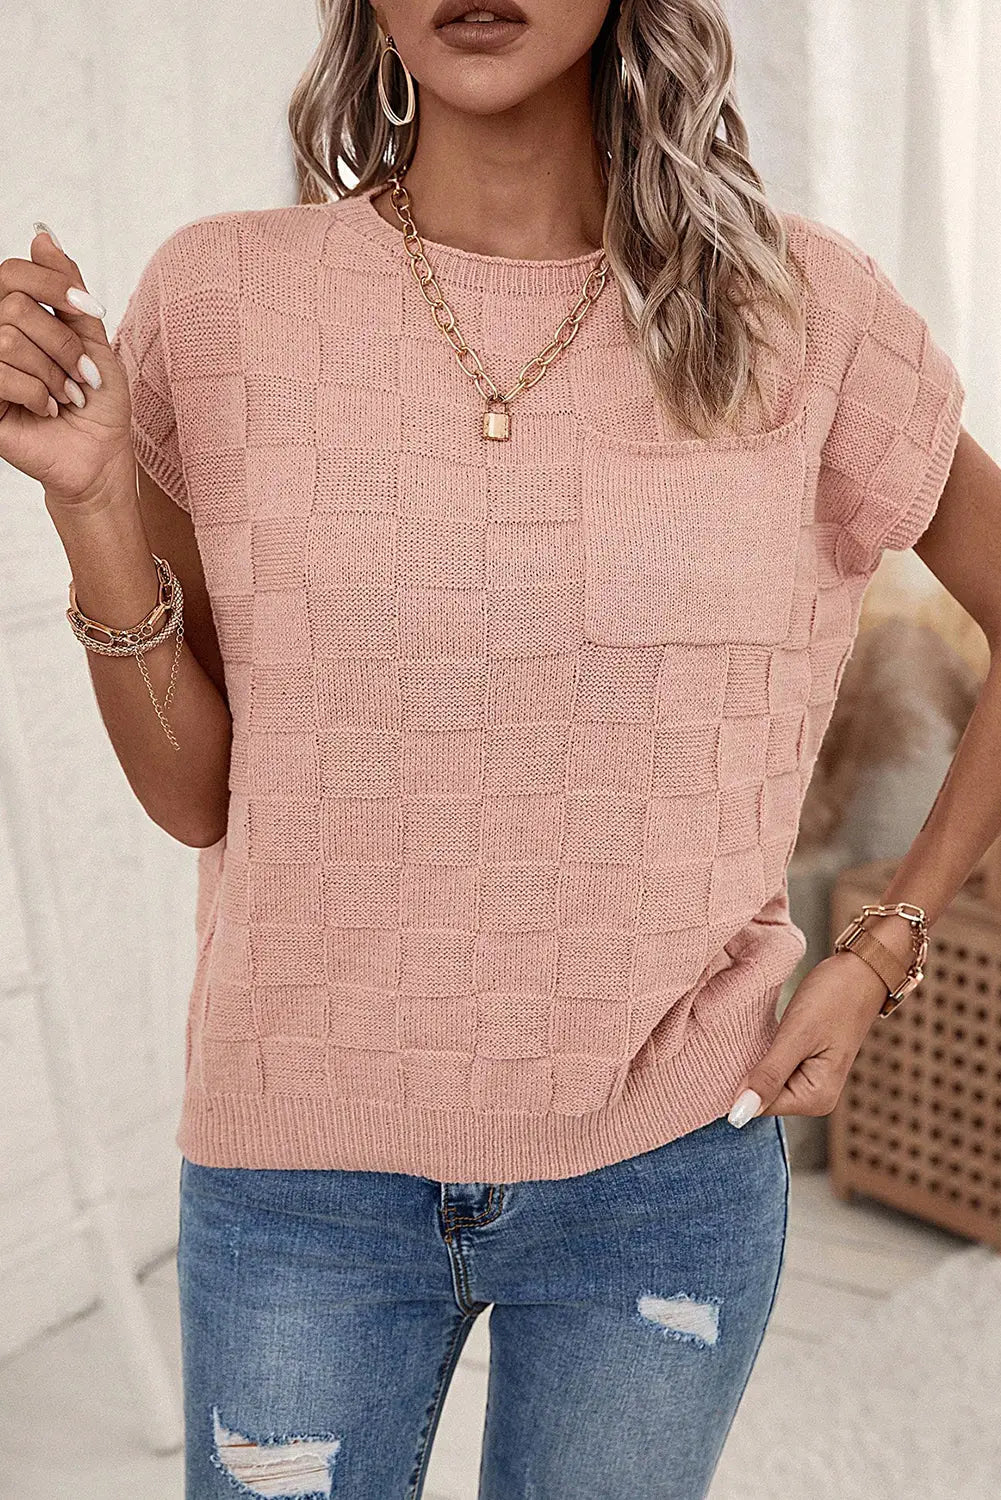 Dusty pink lattice textured knit short sleeve sweater - sweaters & cardigans